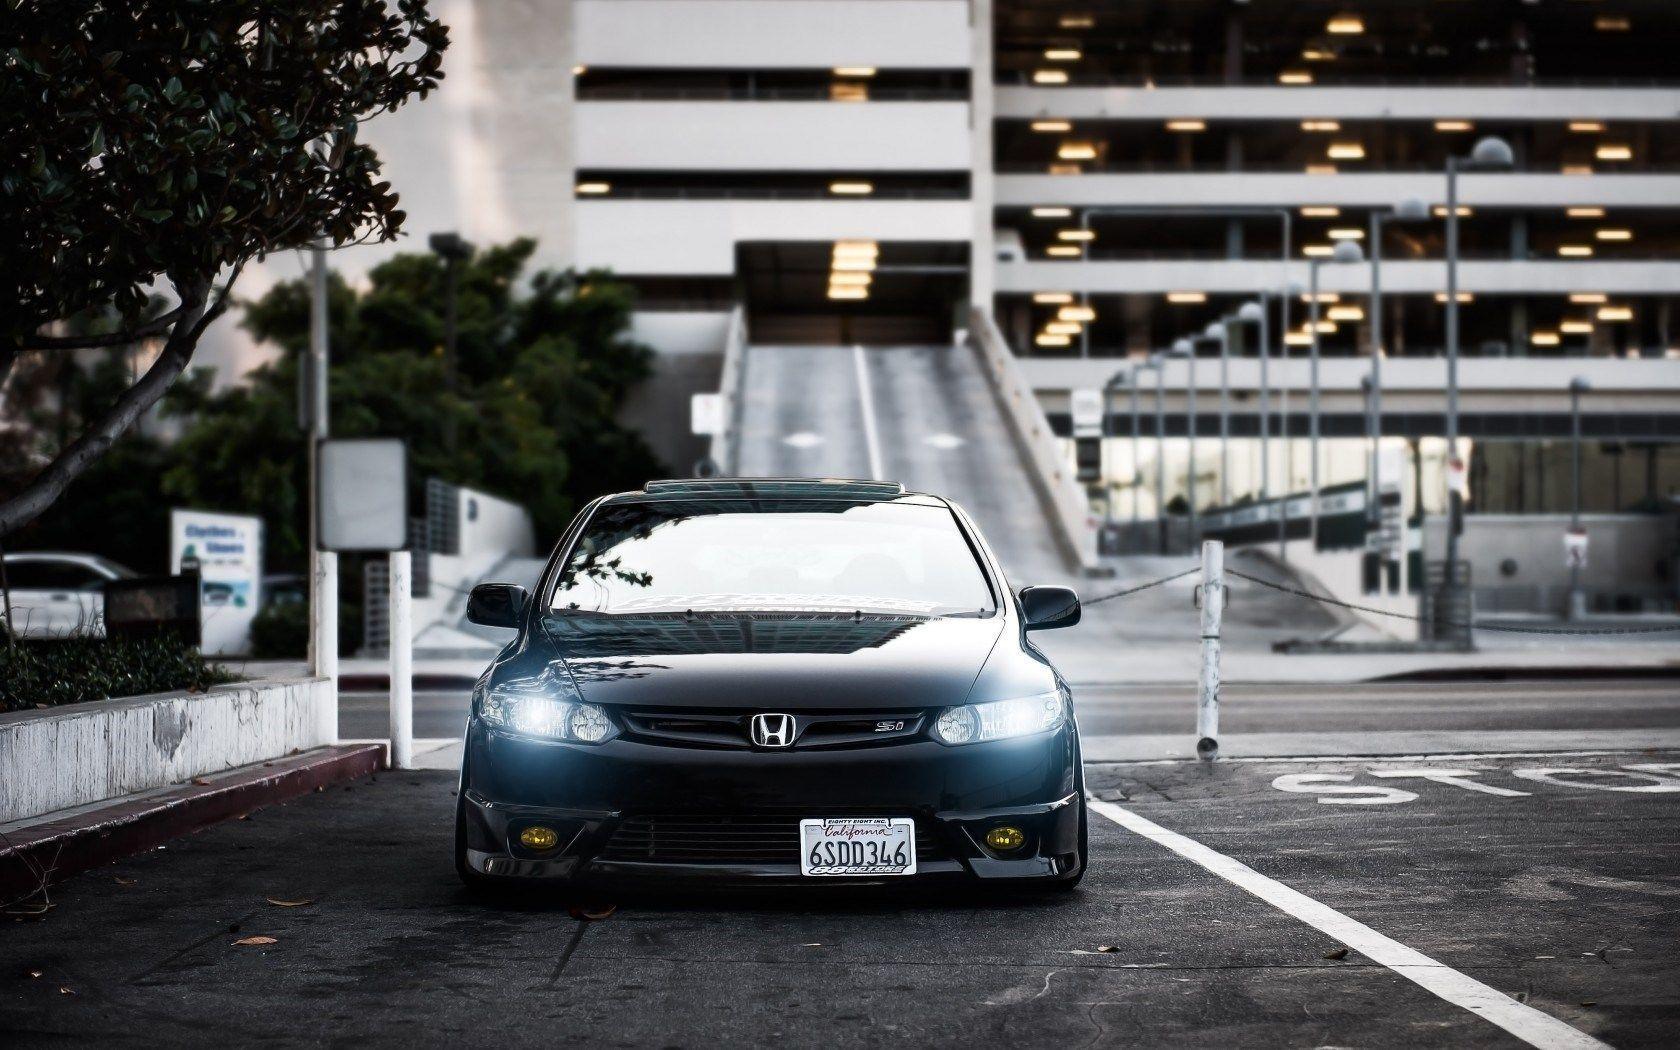 Honda Civic Wallpapers Group with items